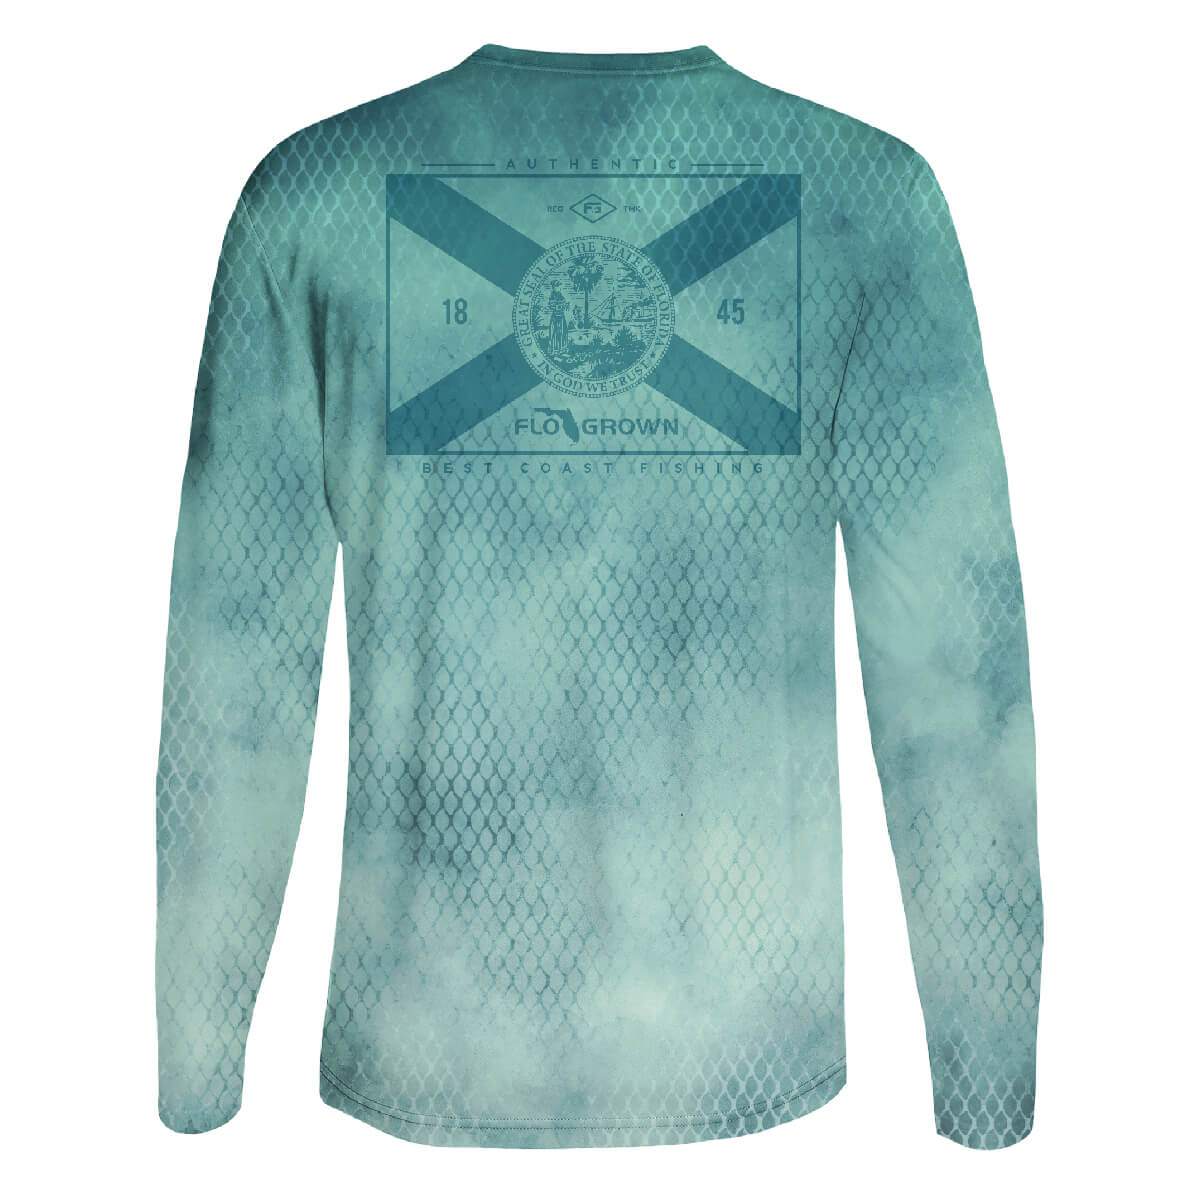 FloGrown Men's Misty Scales Performance Graphic Long Sleeve T-Shirt Turquoise Aqua, 2X-Large - Men's Outdoor Graphic Tees at Academy Sports